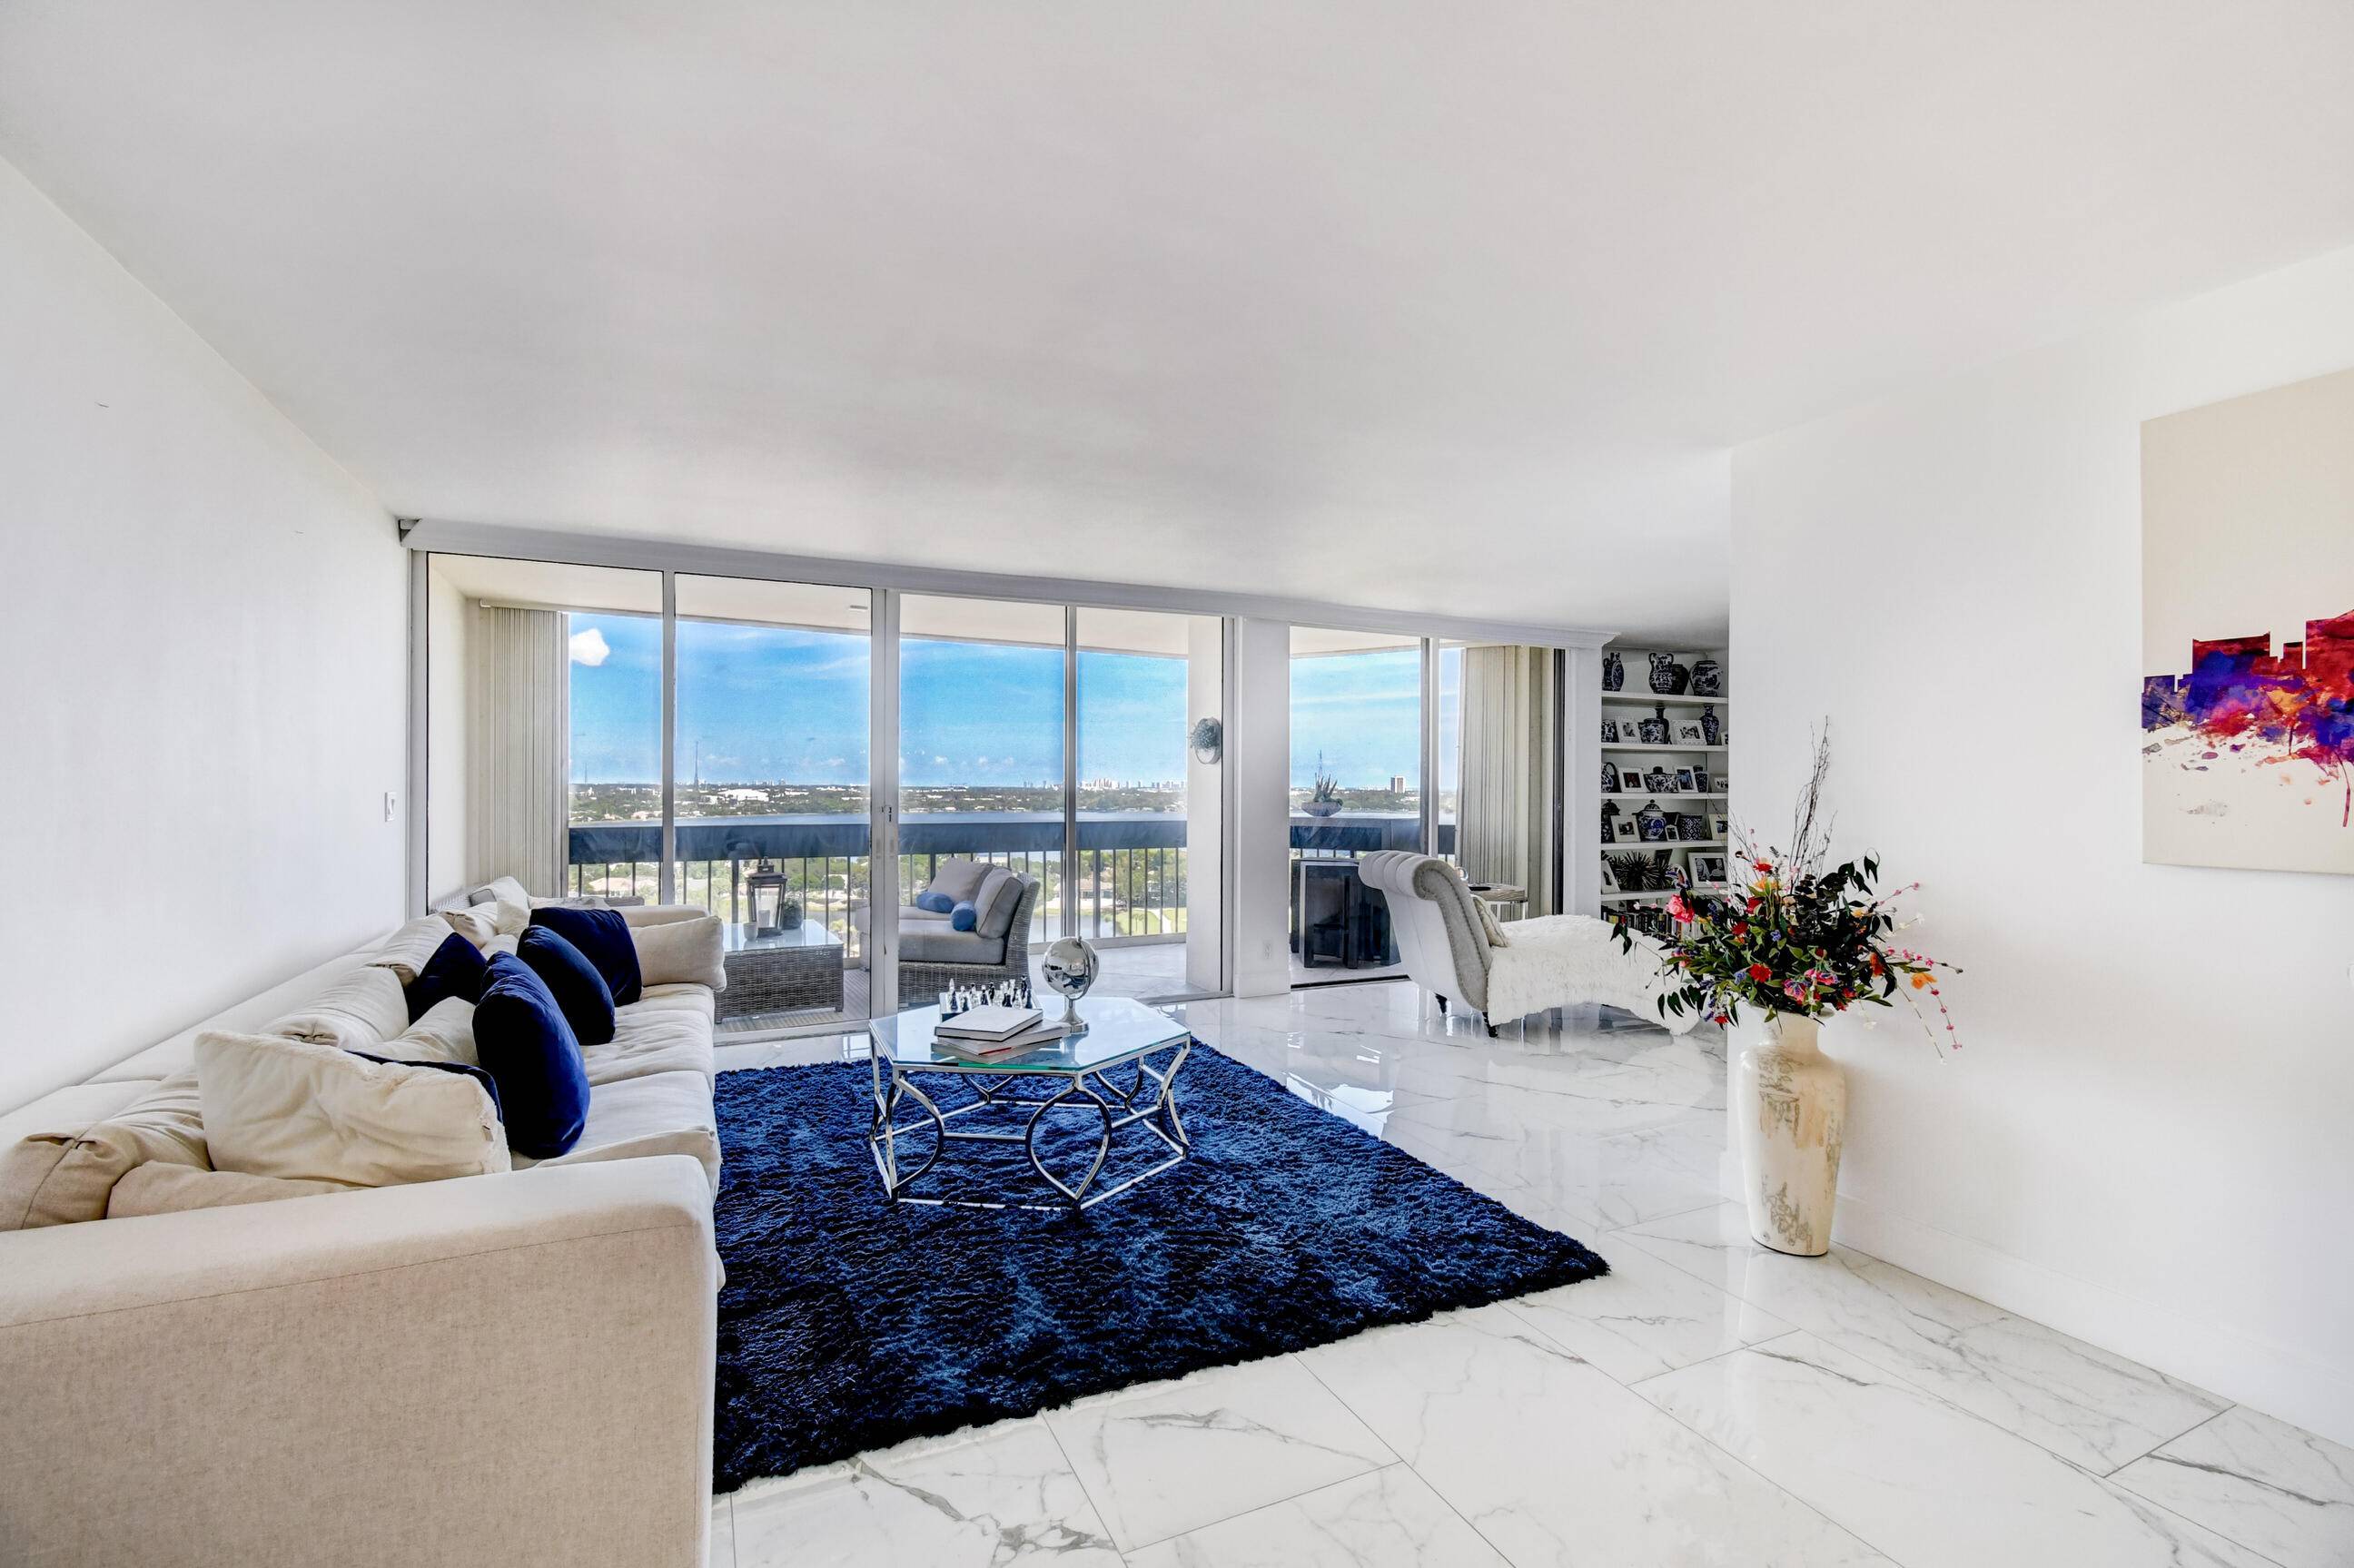 his luxurious Lands of The Presidents condo will take your breath away with sprawling views of the Banyan Cay Jack Nicklaus Signature Golf course, Clear Lake, Intracoastal waterway and the ...